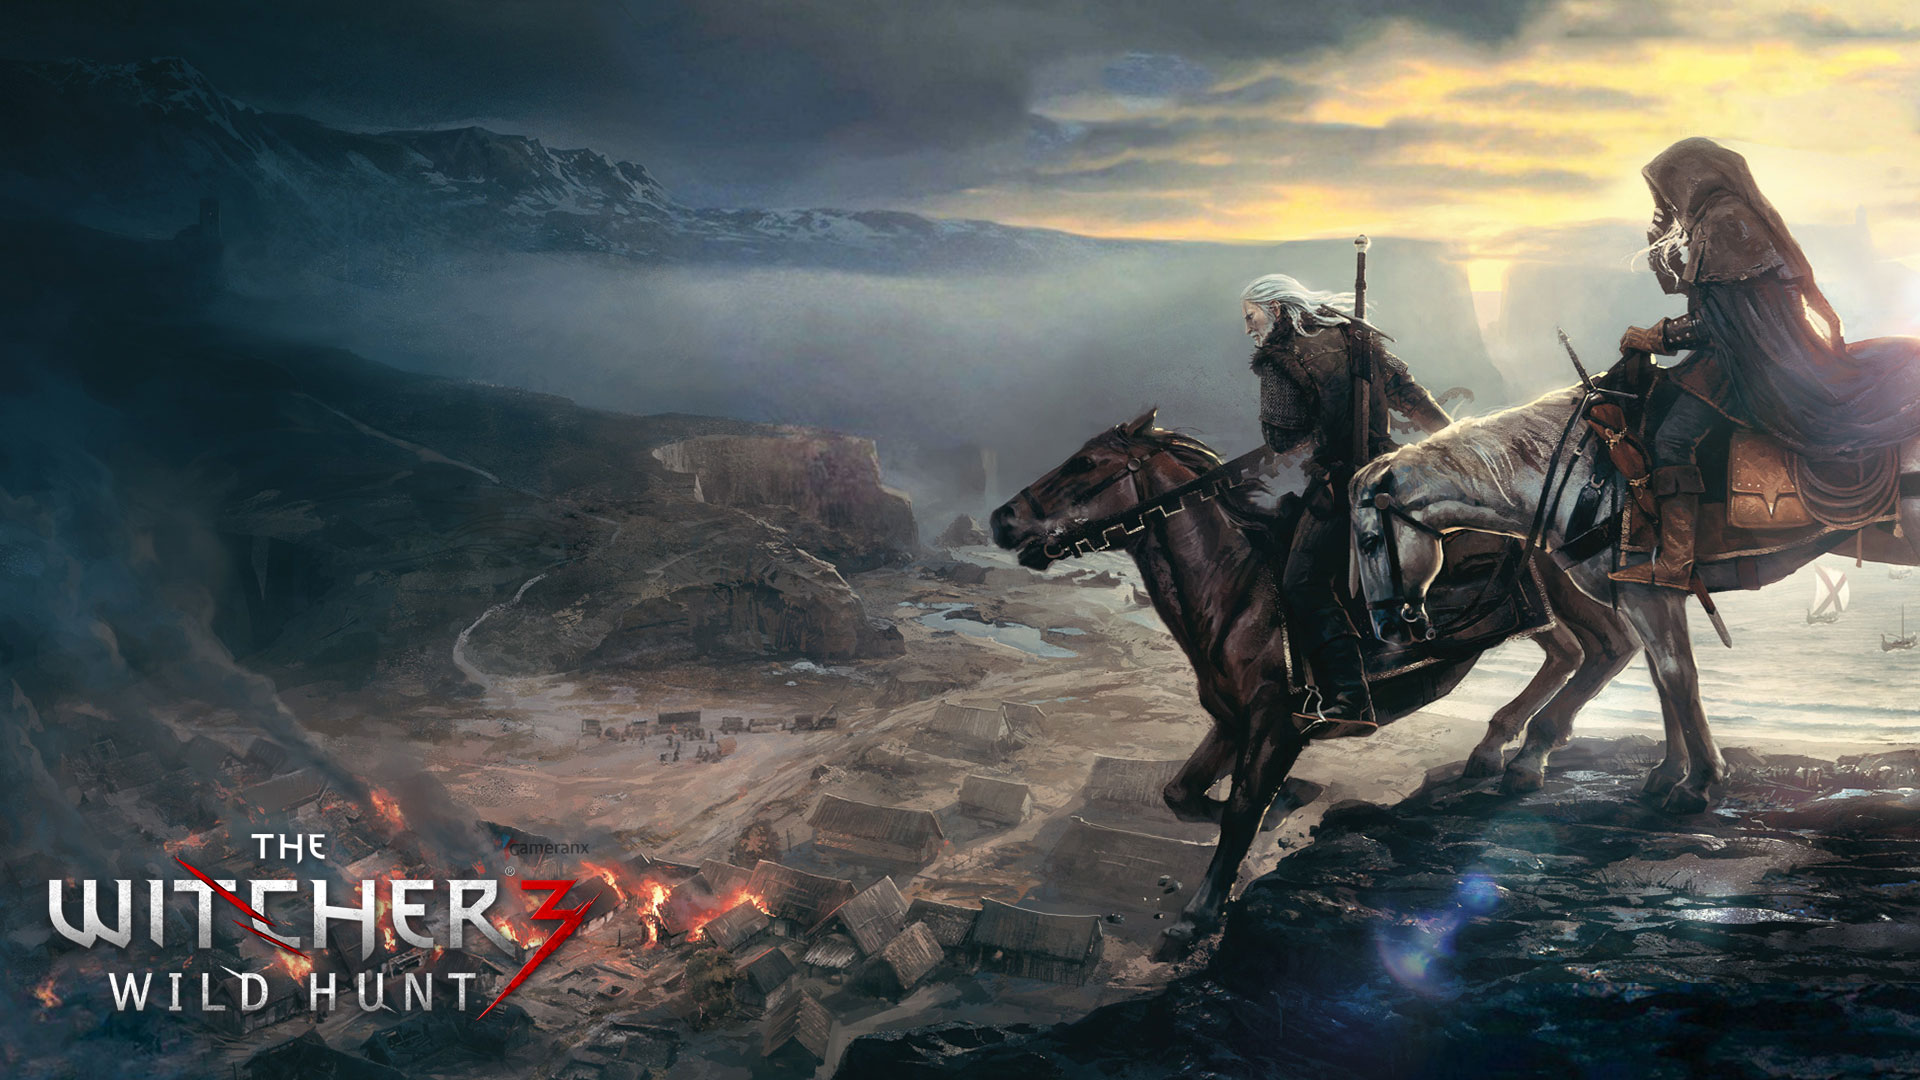 The Witcher 3 Wild Hunt Wallpapers HD Wallpapers Page 2 1920x1080